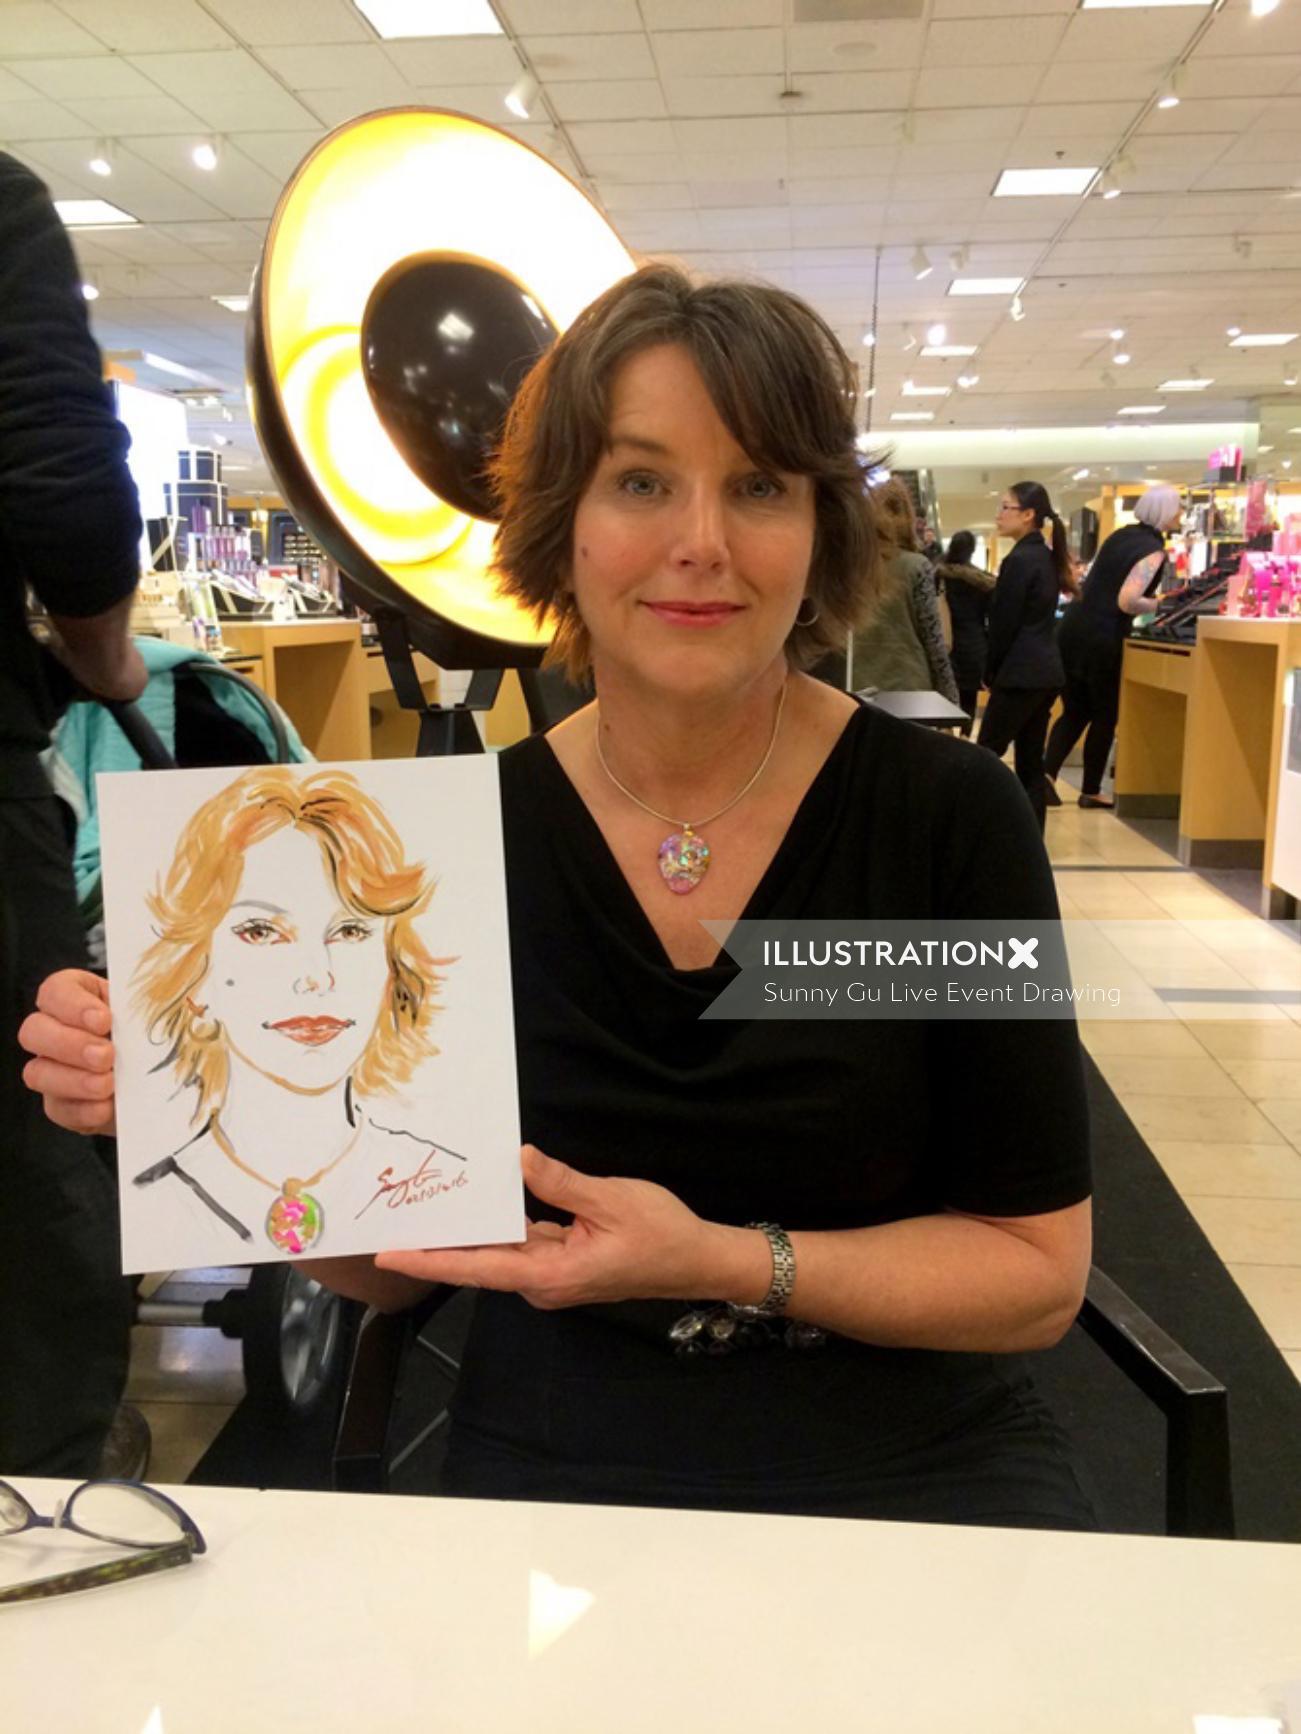 Live event drawing of woman with portrait
